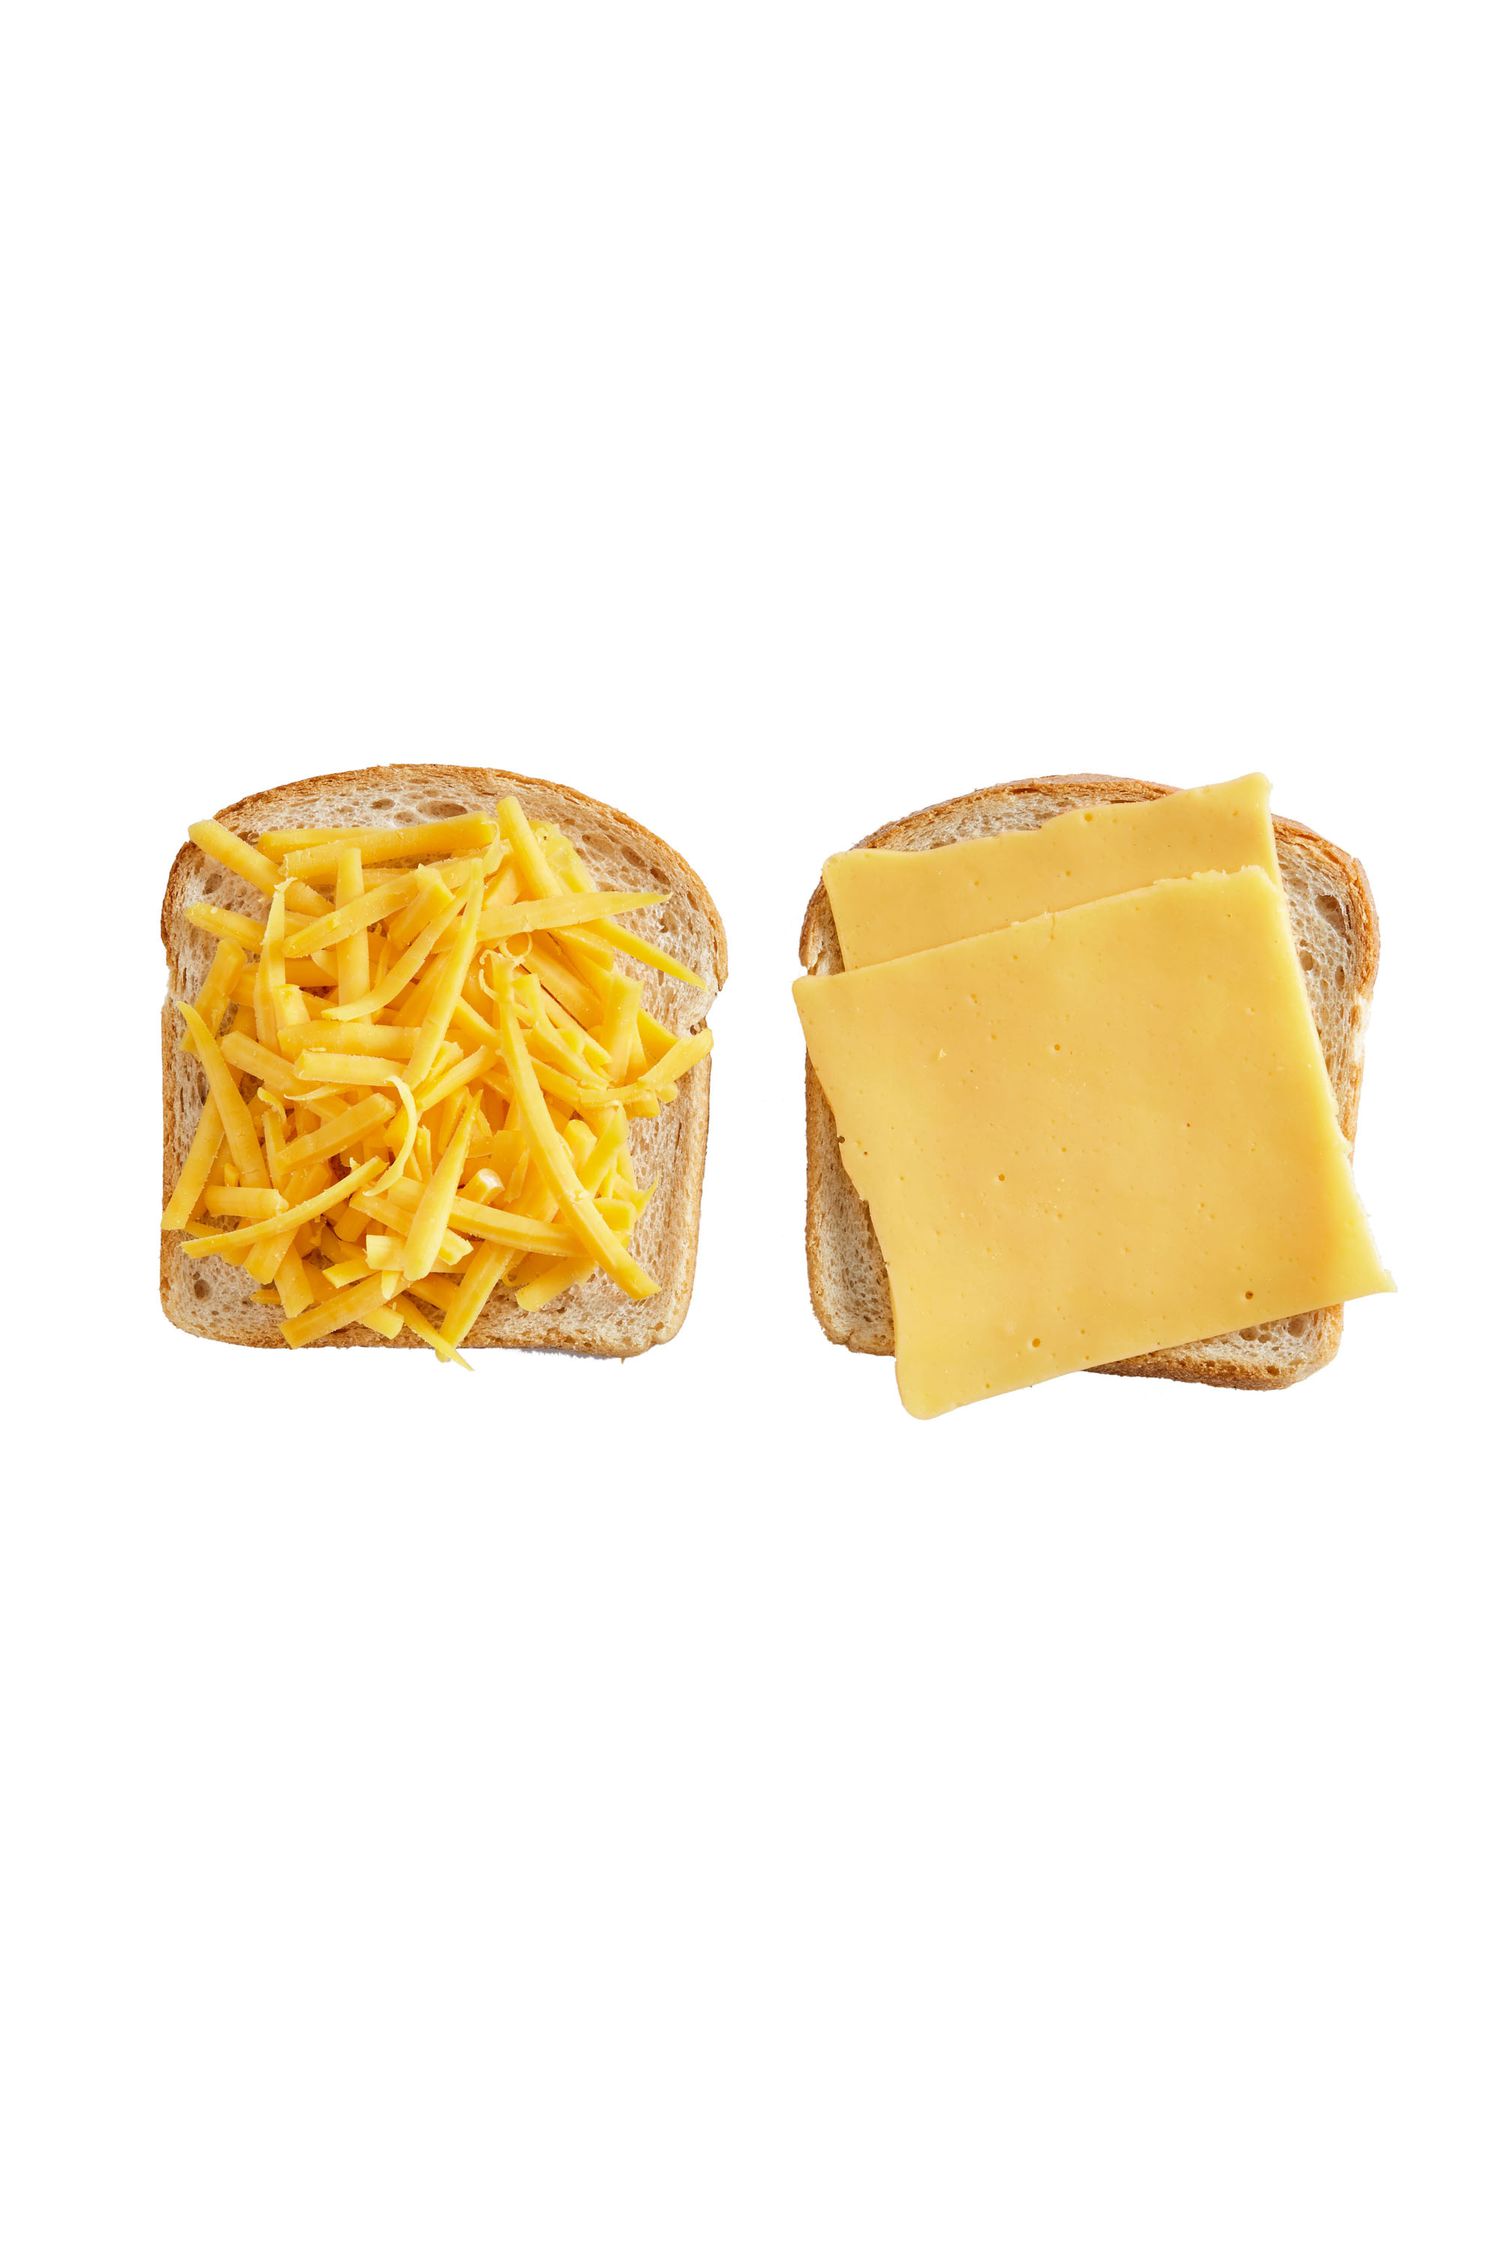 cheese on bread slices